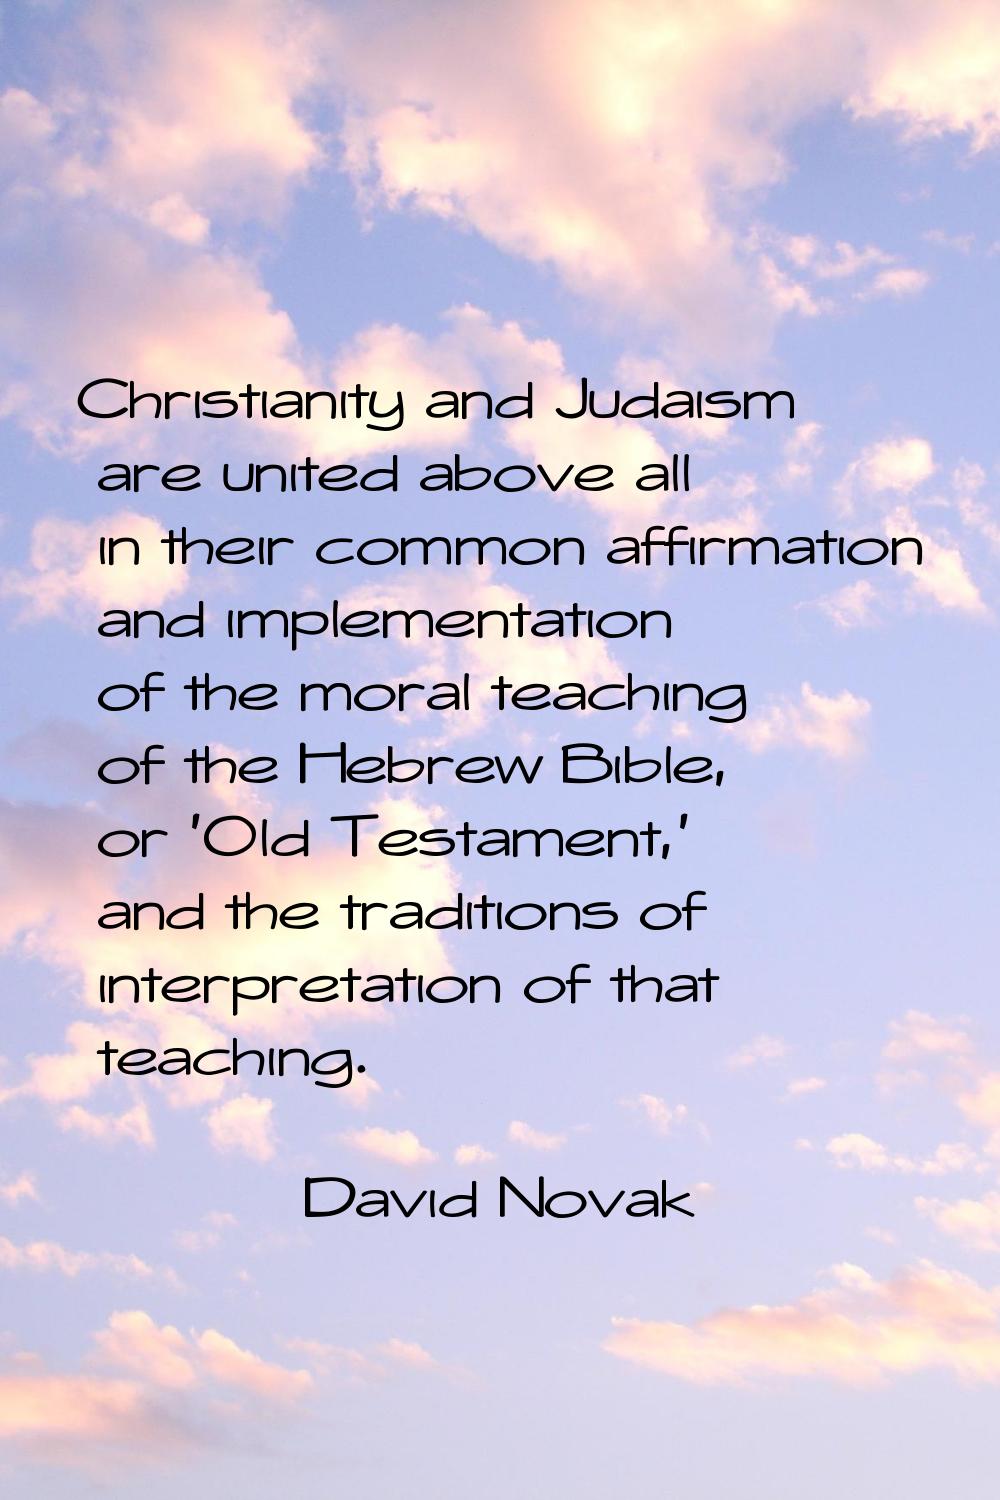 Christianity and Judaism are united above all in their common affirmation and implementation of the